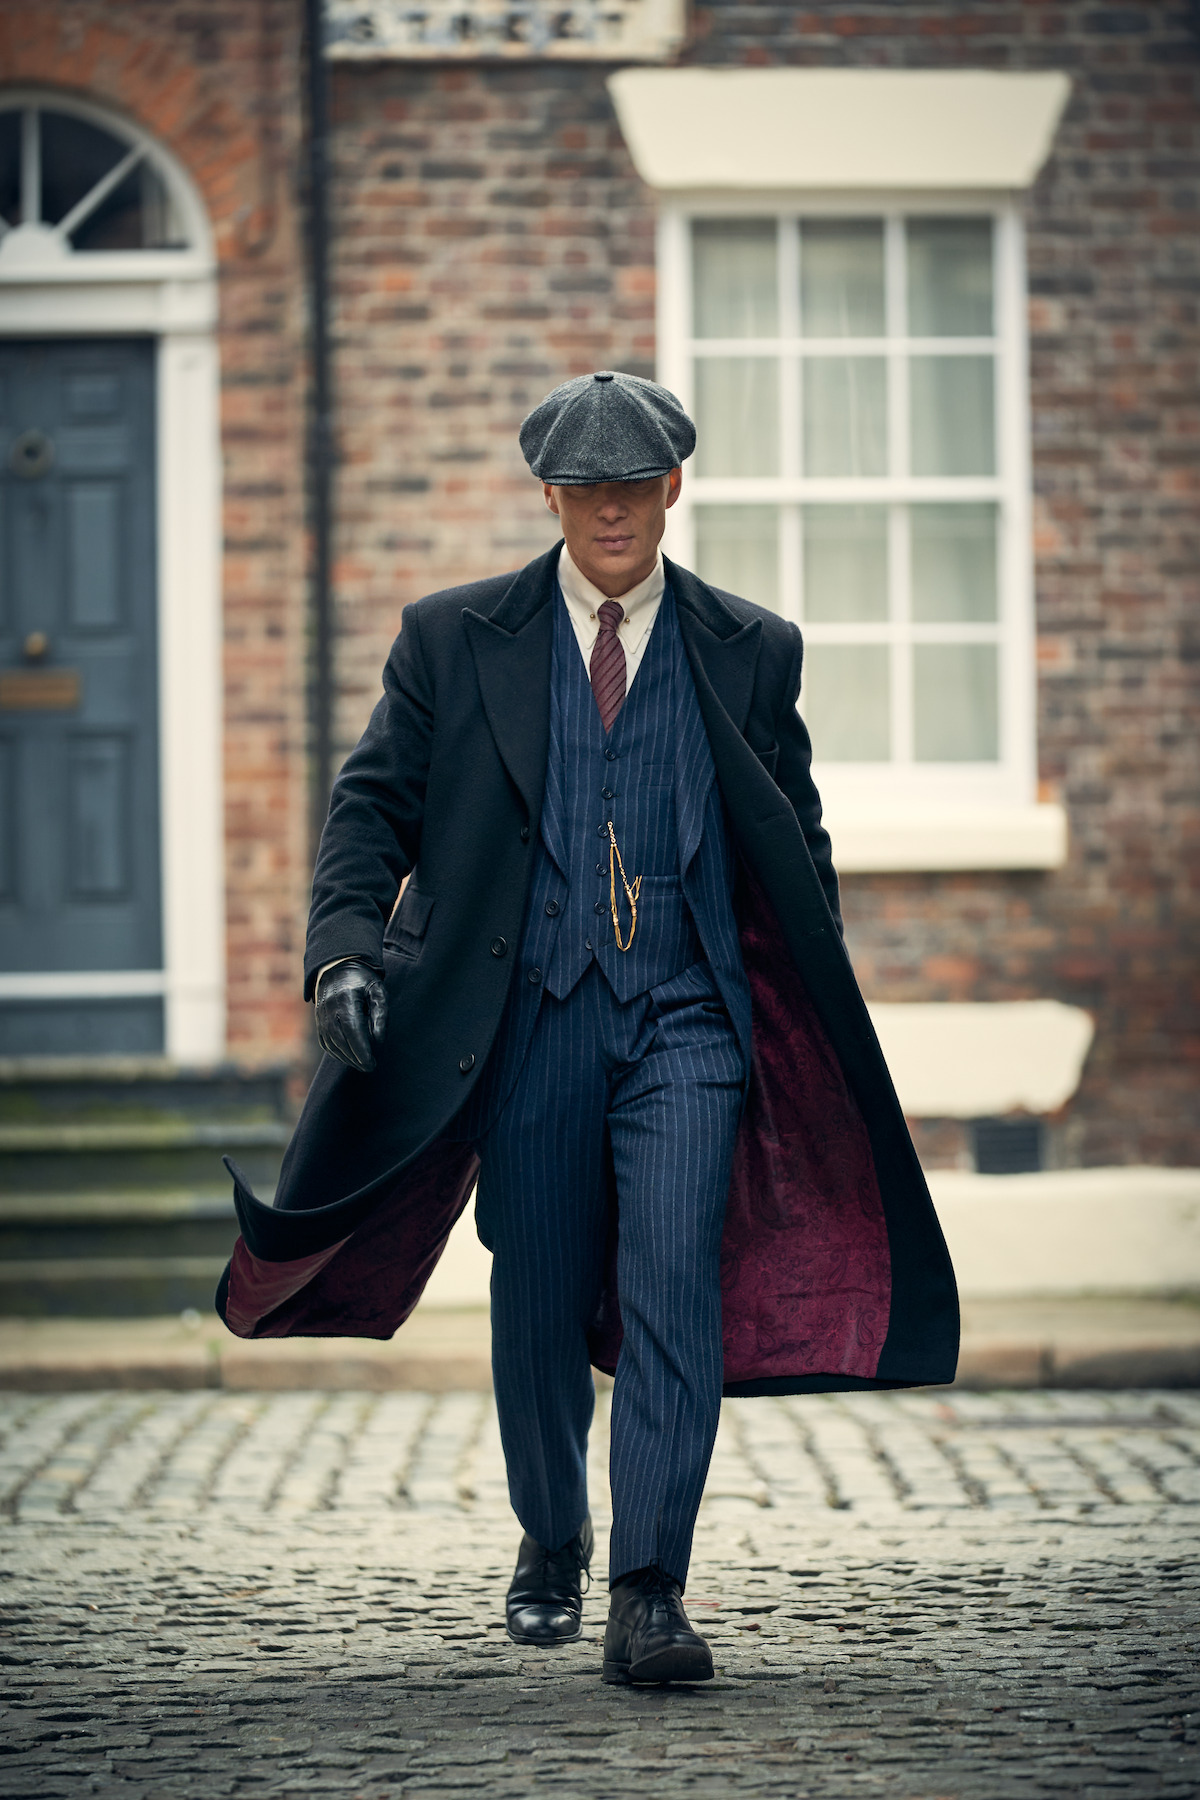 Tommy shelby costume